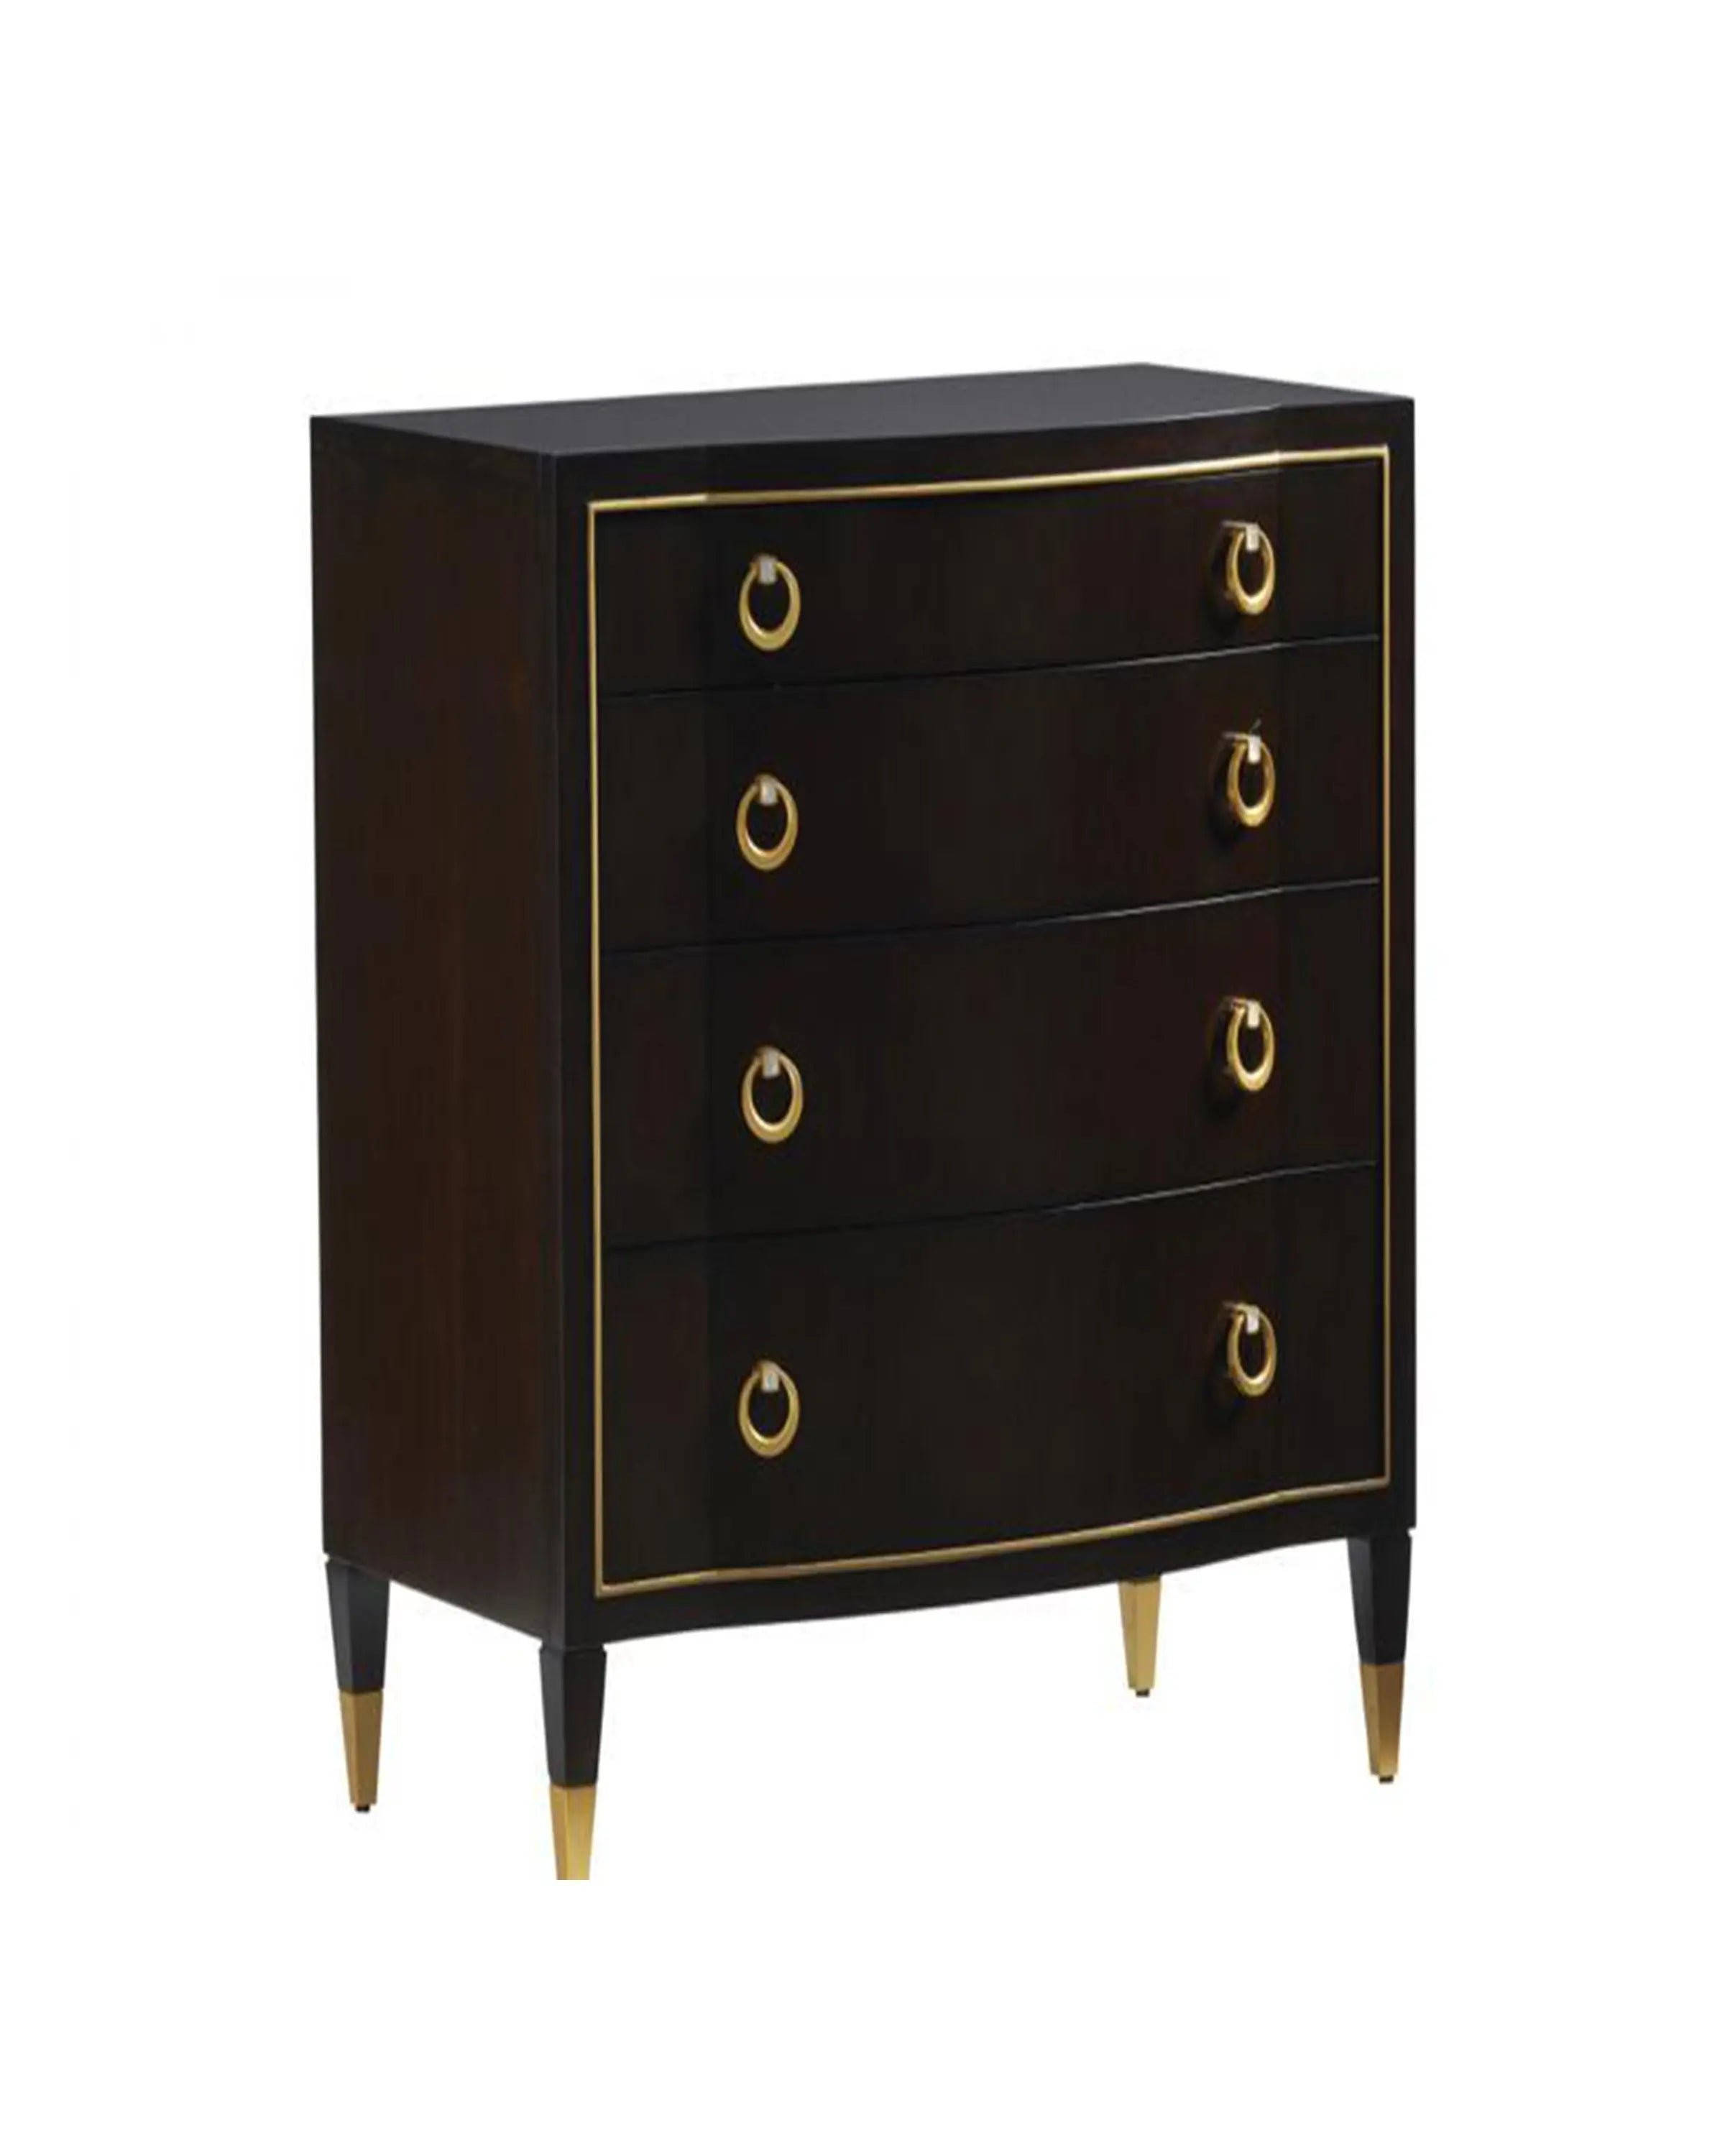 NOBLE DARK BROWN WOODEN SIDE TABLE ANGIE HOMES